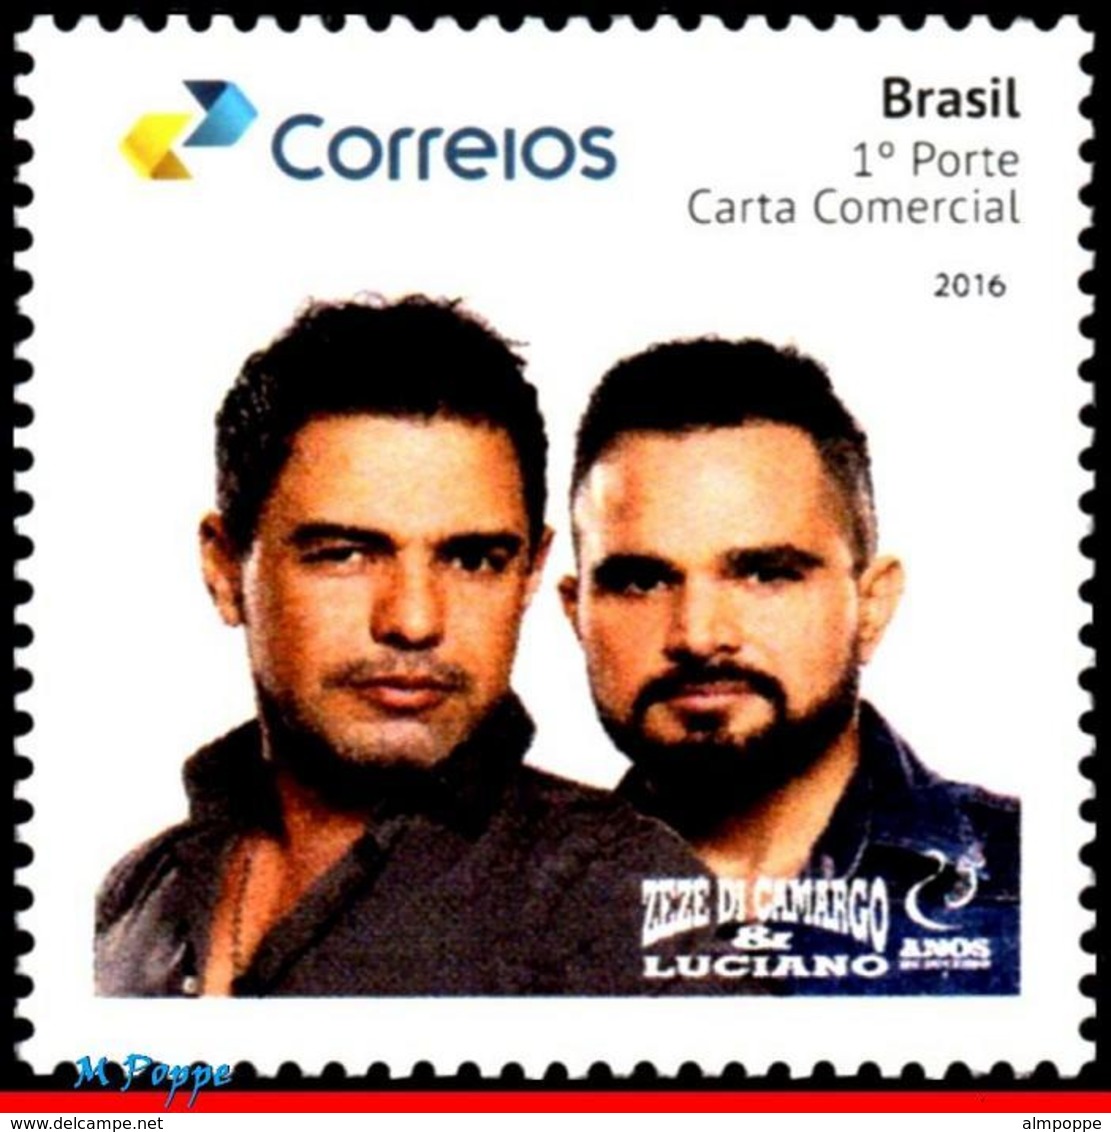 Ref. BR-V2016-28 BRAZIL 2016 FAMOUS PEOPLE, SINGERS, MUSICIANS, ZEZE, DI CARMARGO & LUCIANO, PERSONALIZED MNH 1V - Neufs